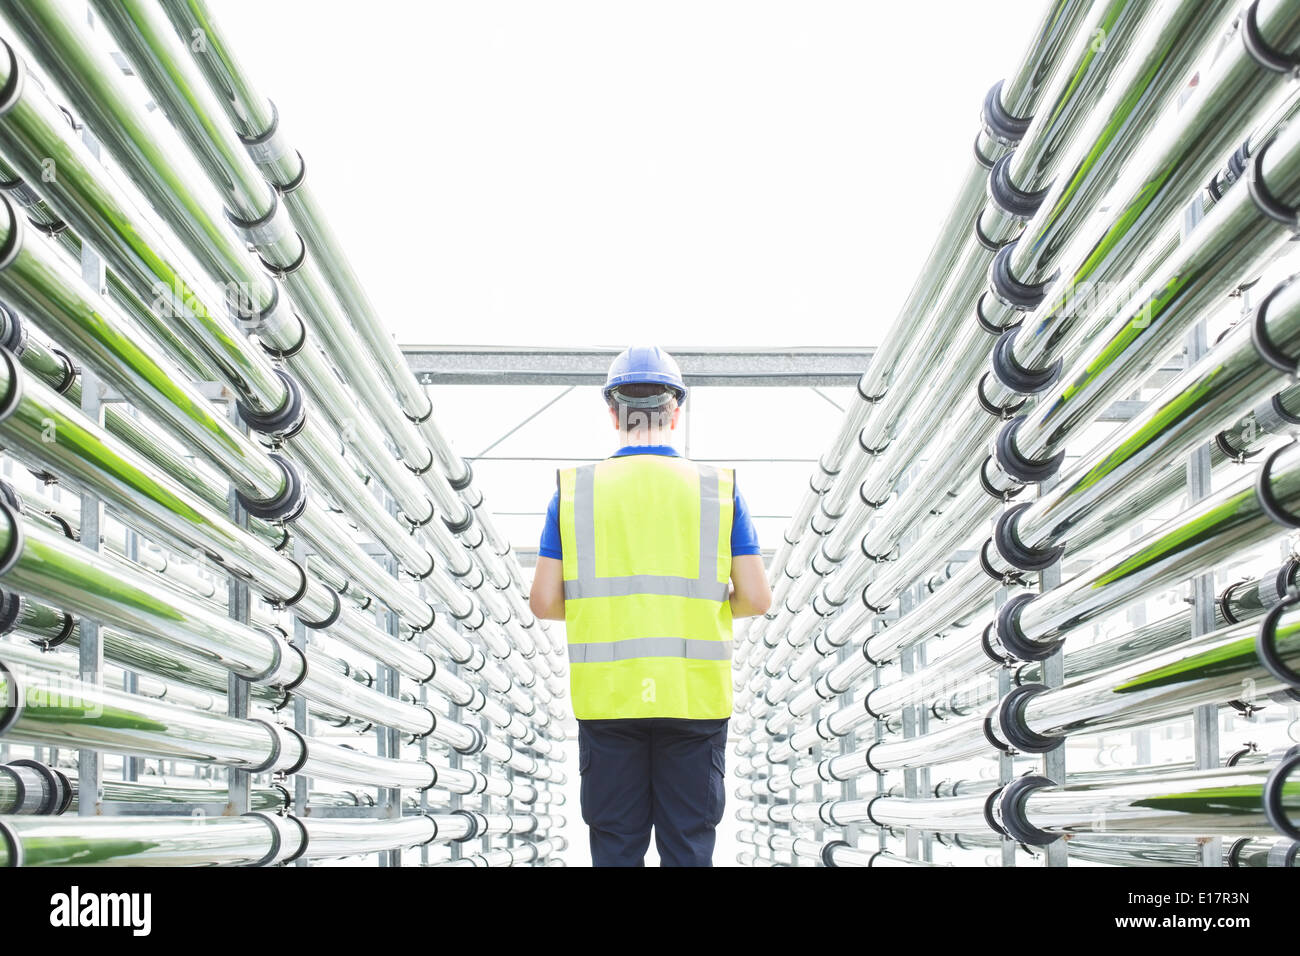 Engineer among irrigation pipes in greenhouse Stock Photo